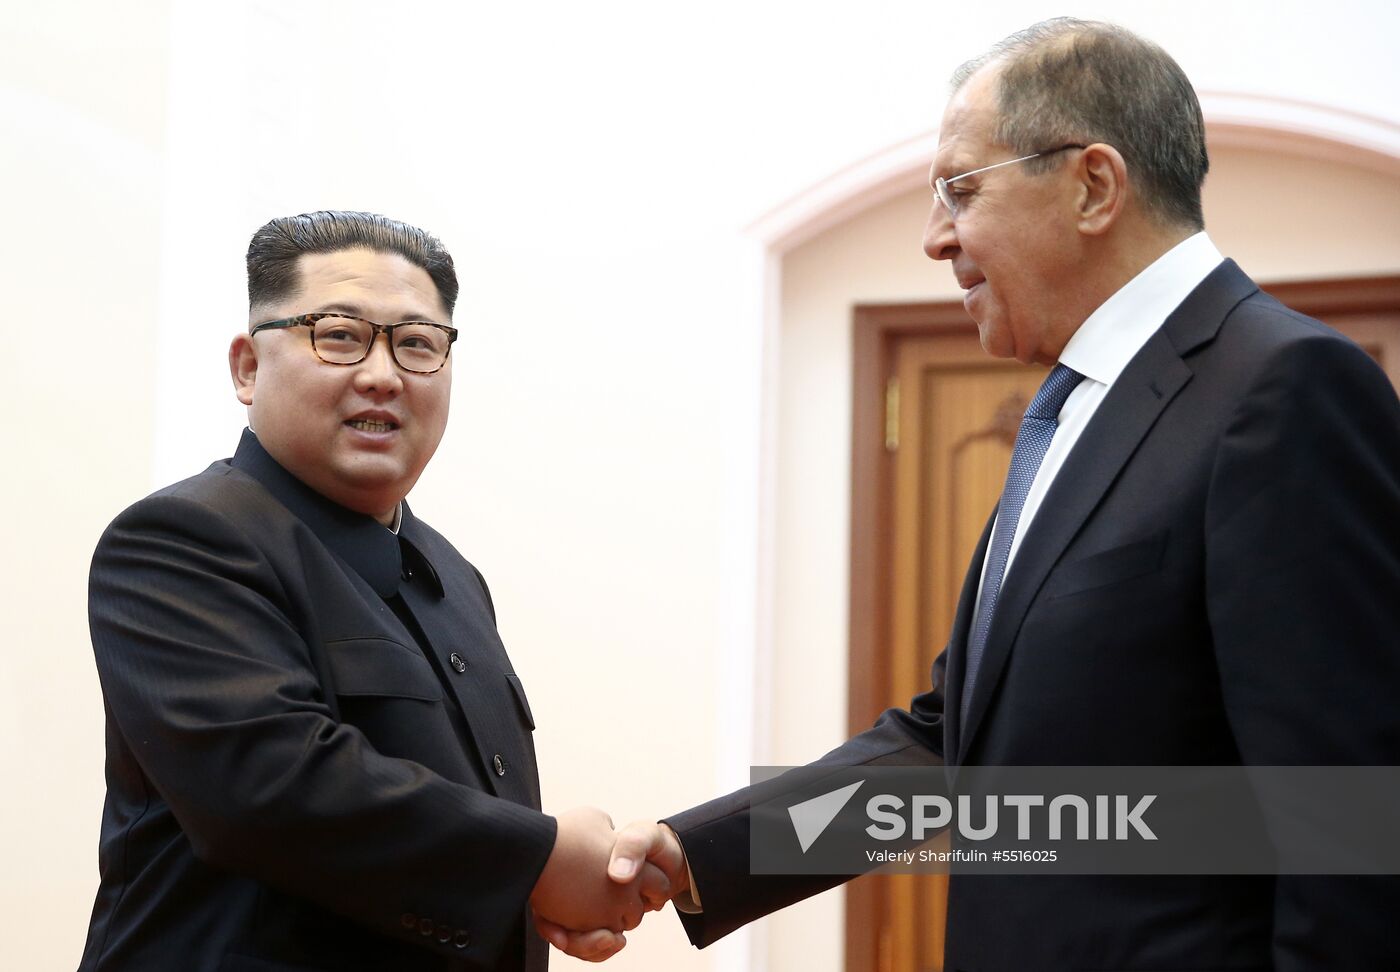 Russian Foreign Minister Sergei Lavrov visits North Korea